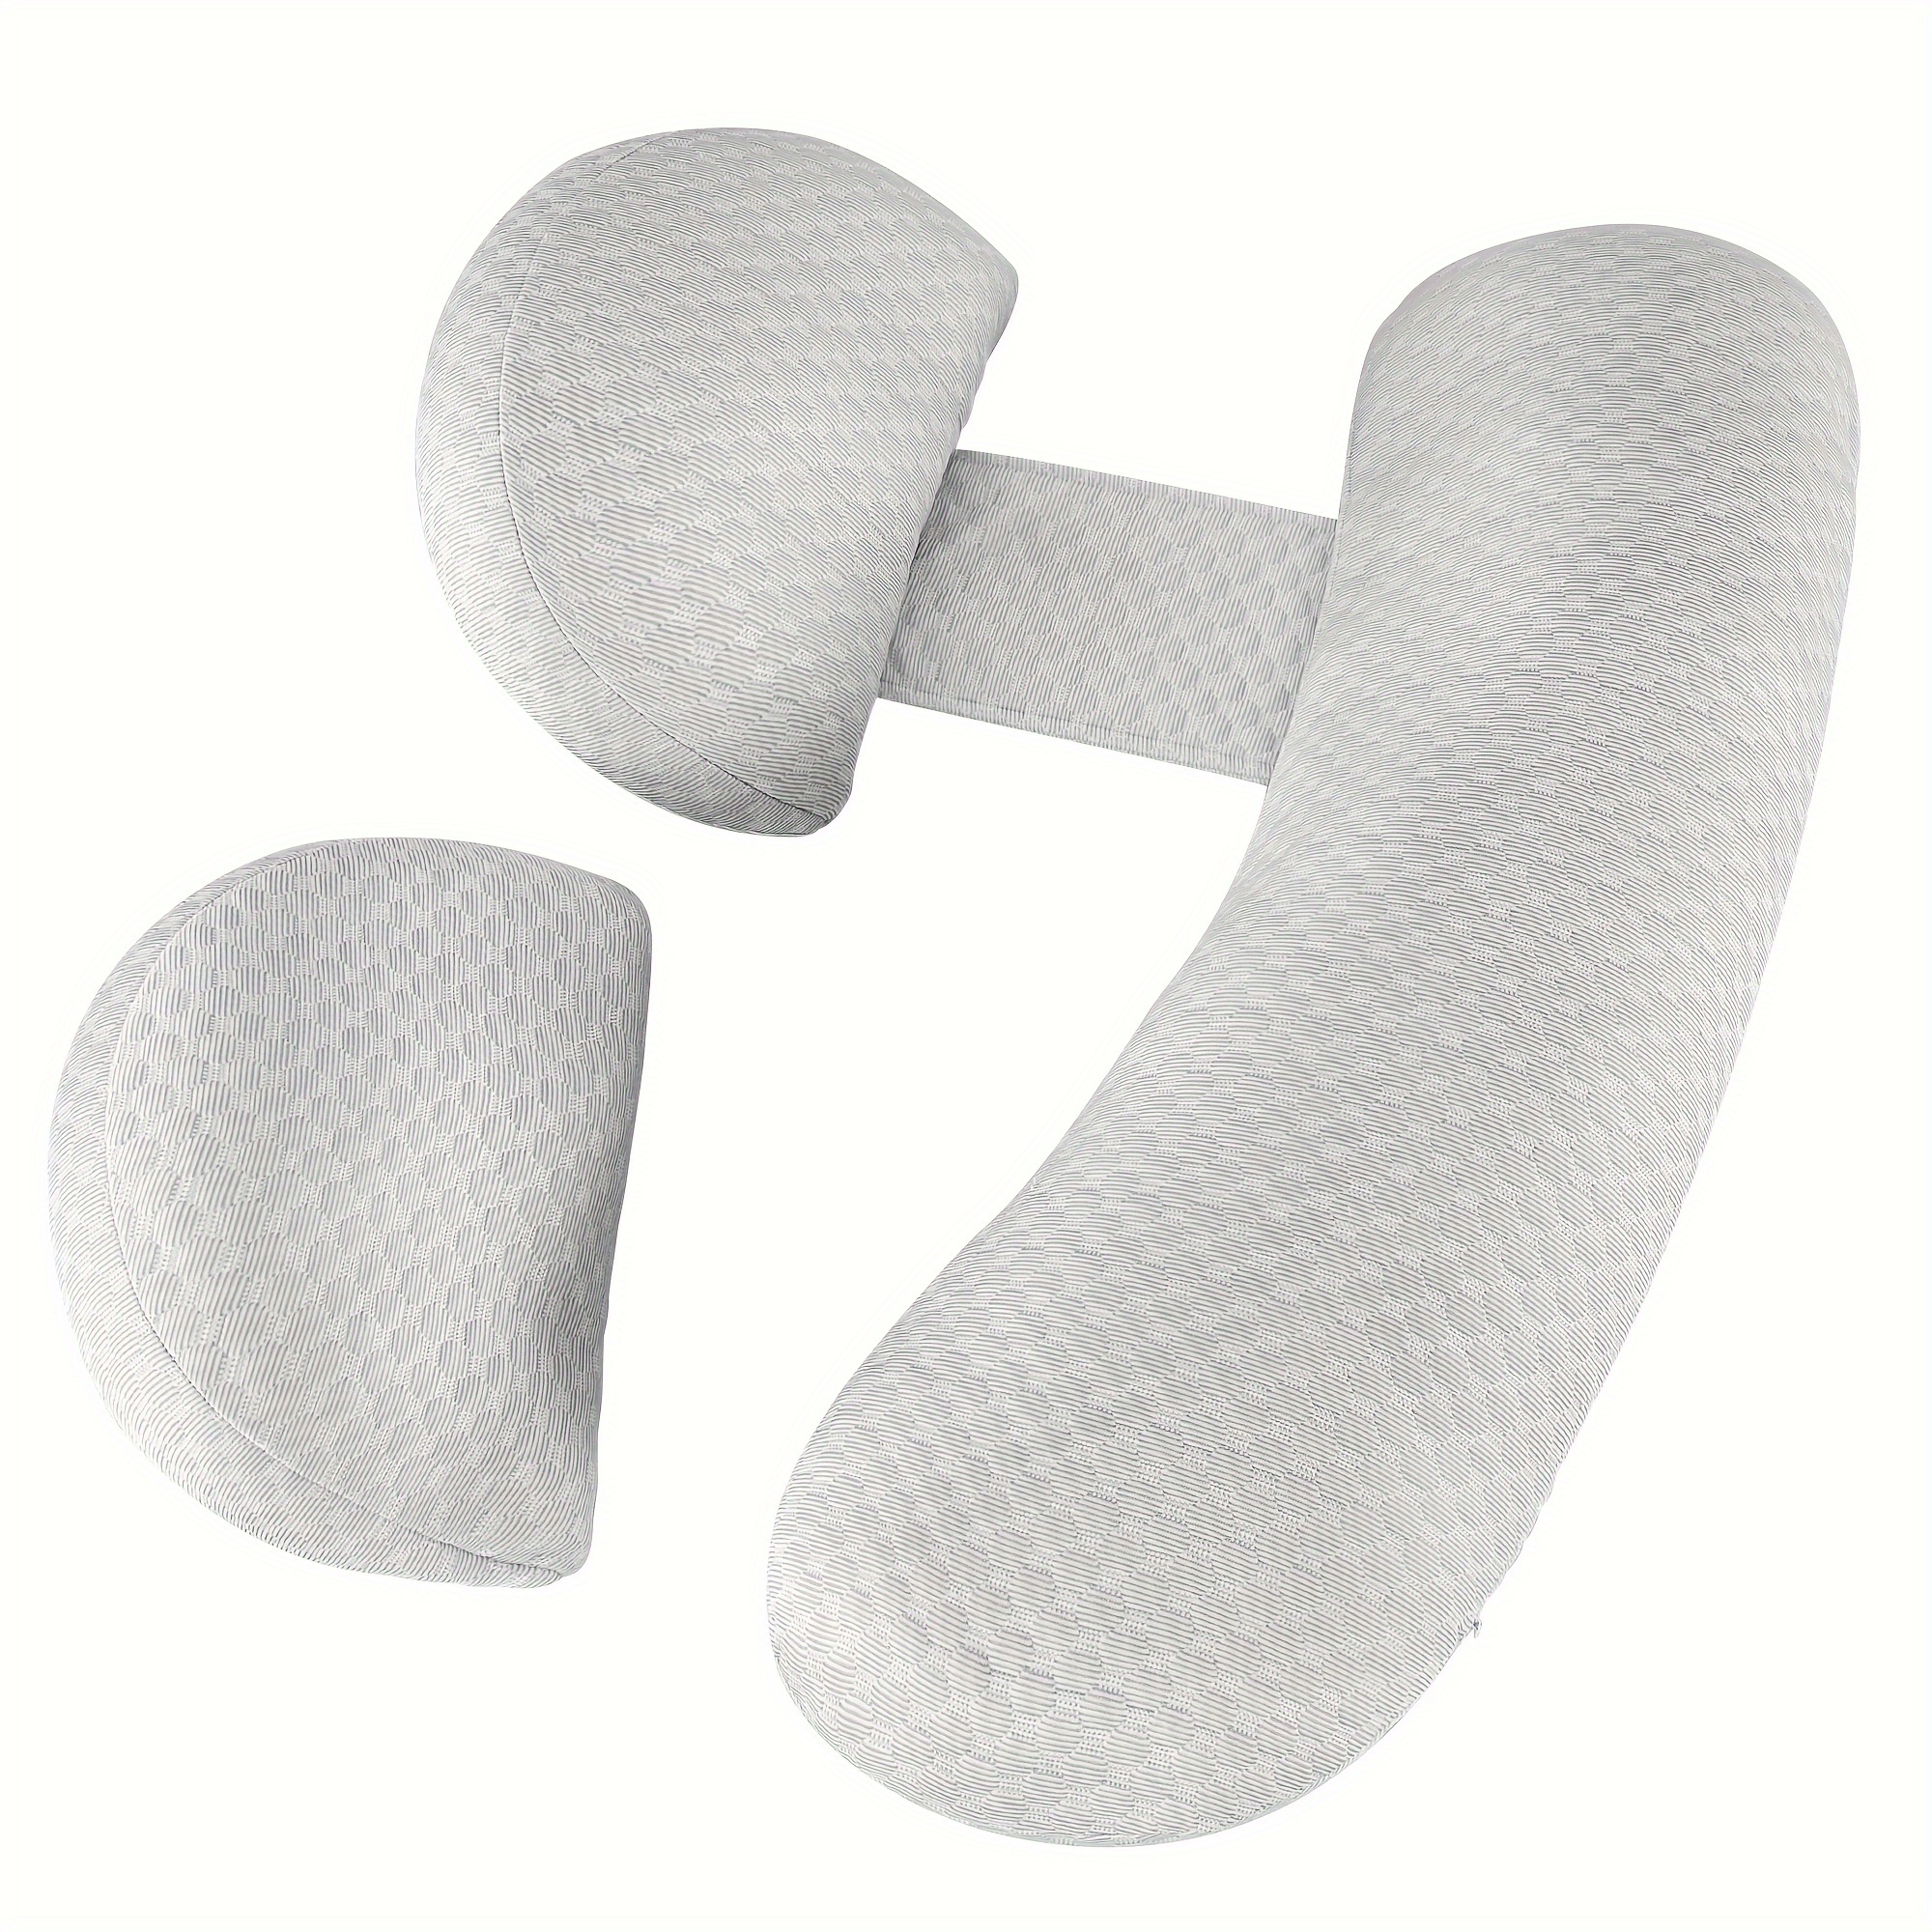 

Pregnancy Pillow For Sleeping, Maternity Pillow For Pregnant Women, Pregnancy Body Pillow Support Back, Hips, Legs, Belly, Detachable And Adjustable Air Mesh Pillow Cover